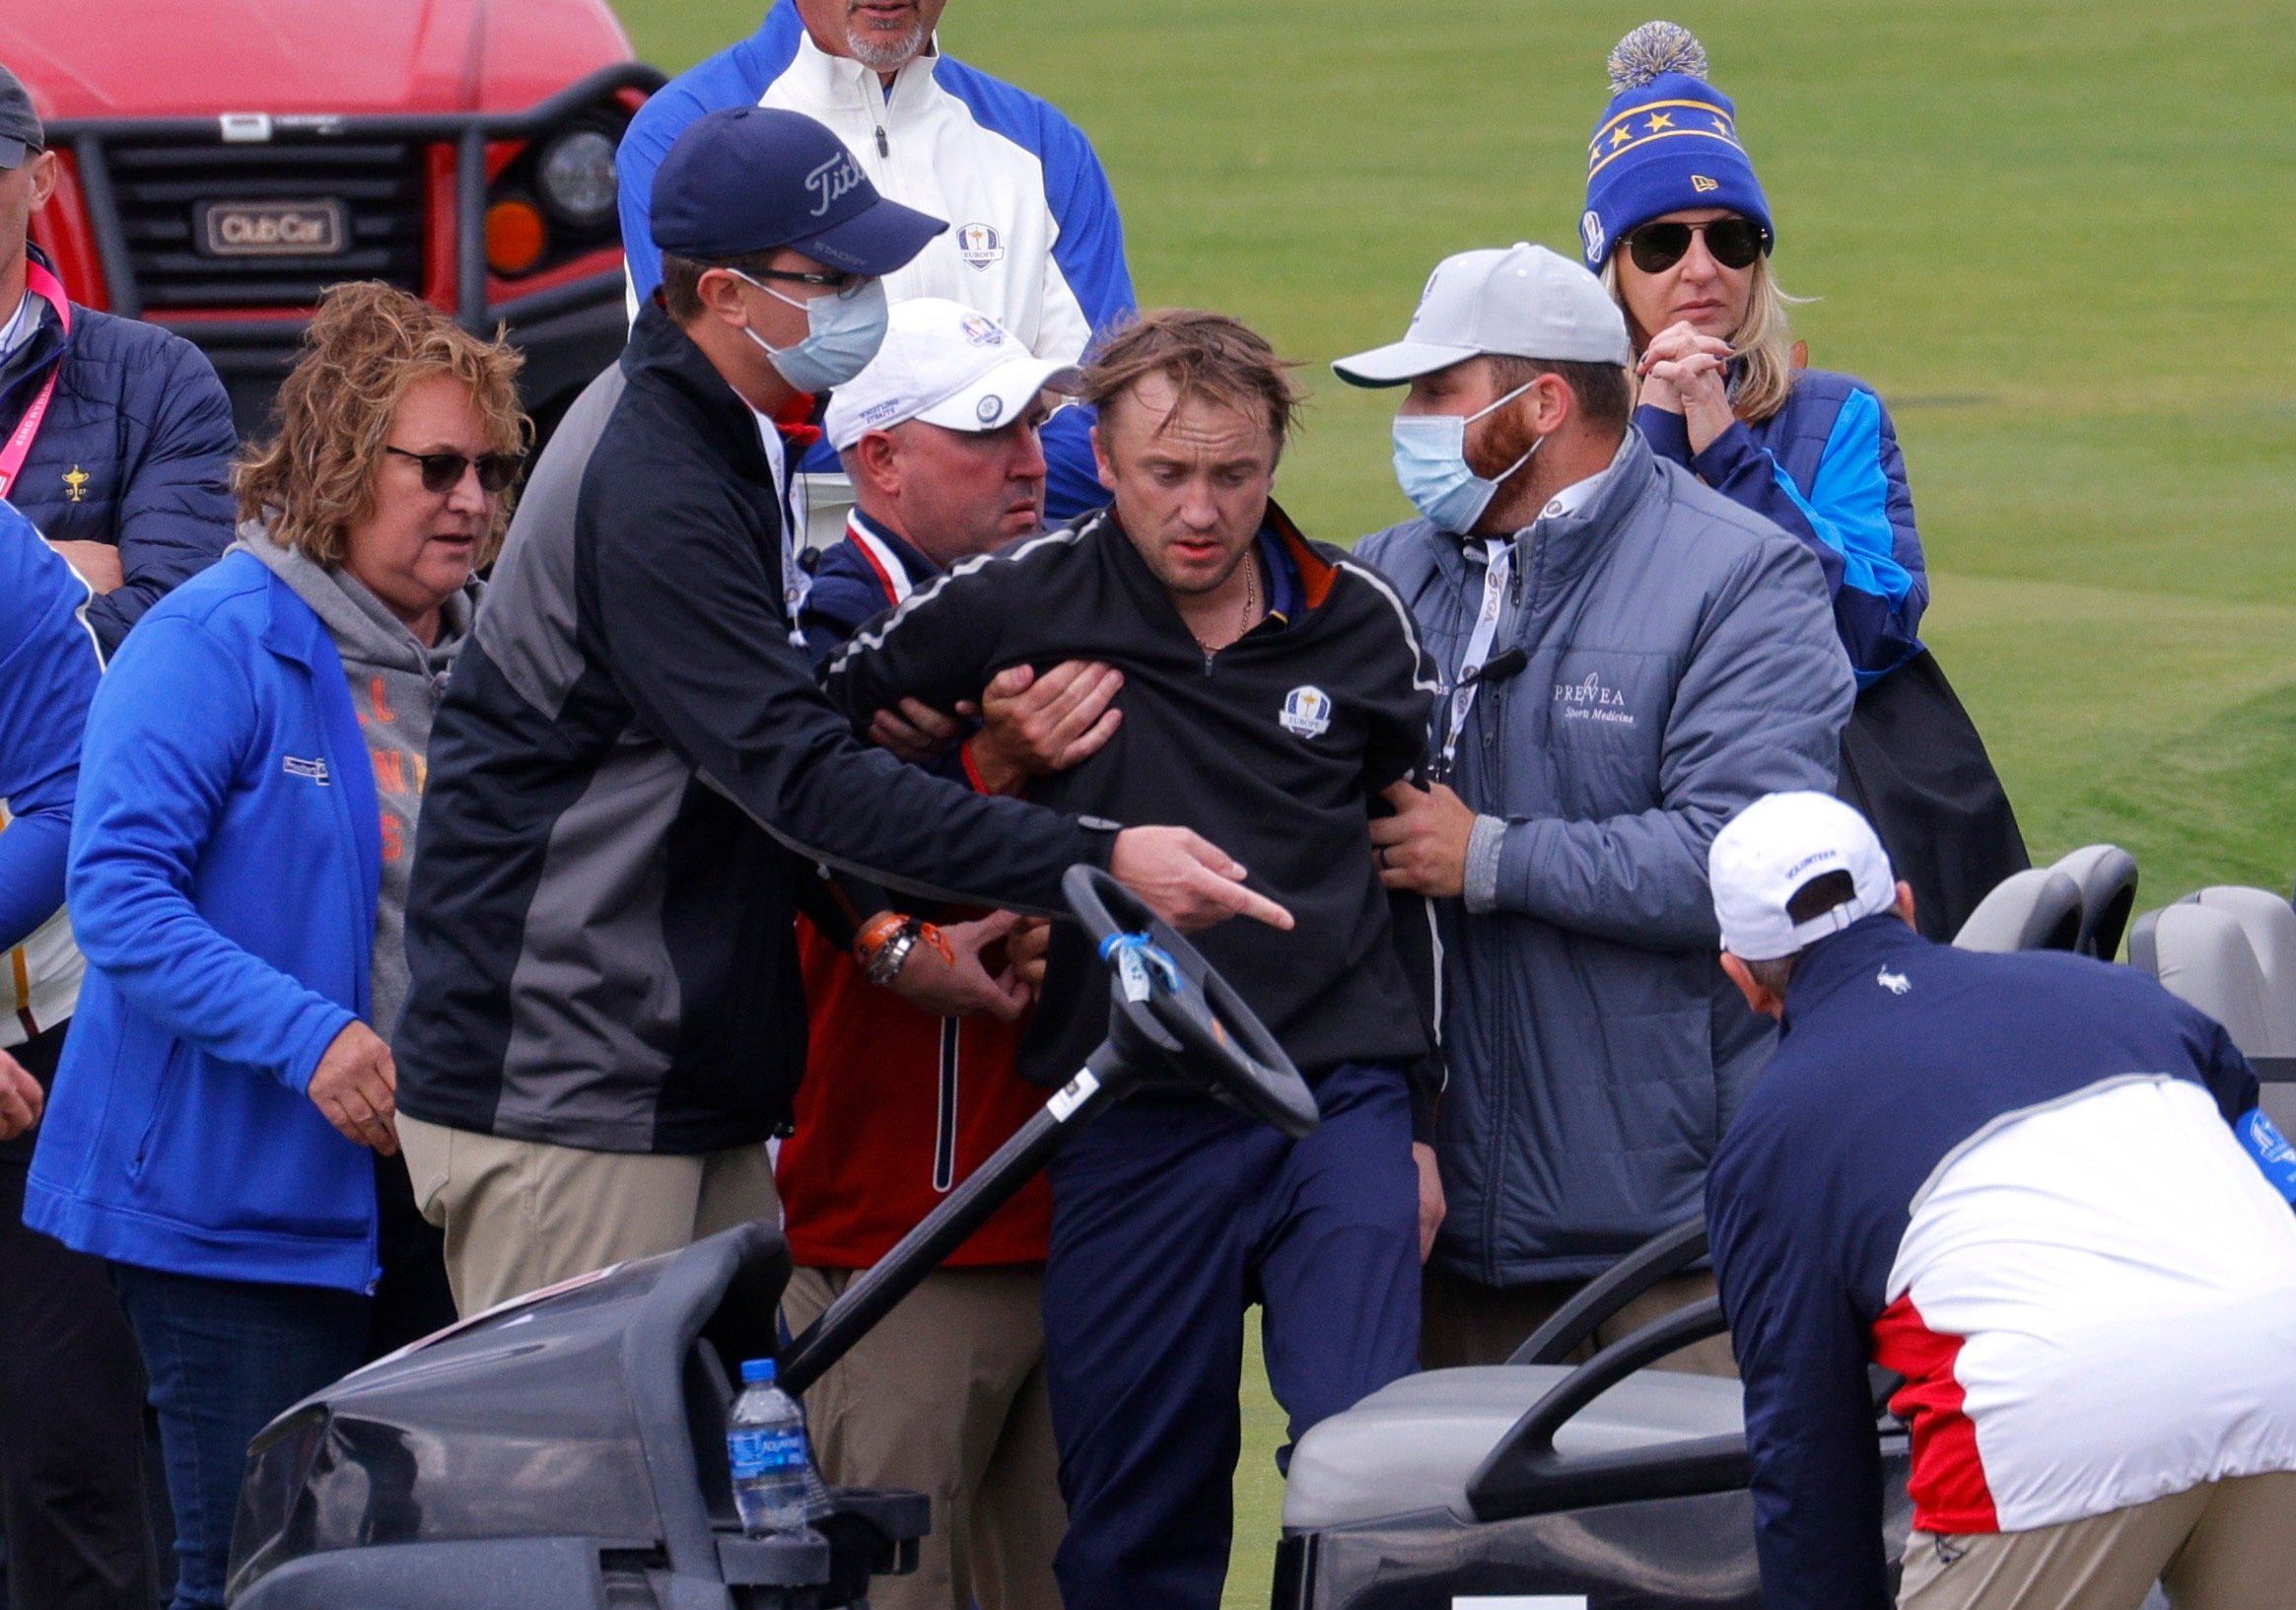 He had been carried to a golf cart after the health scare